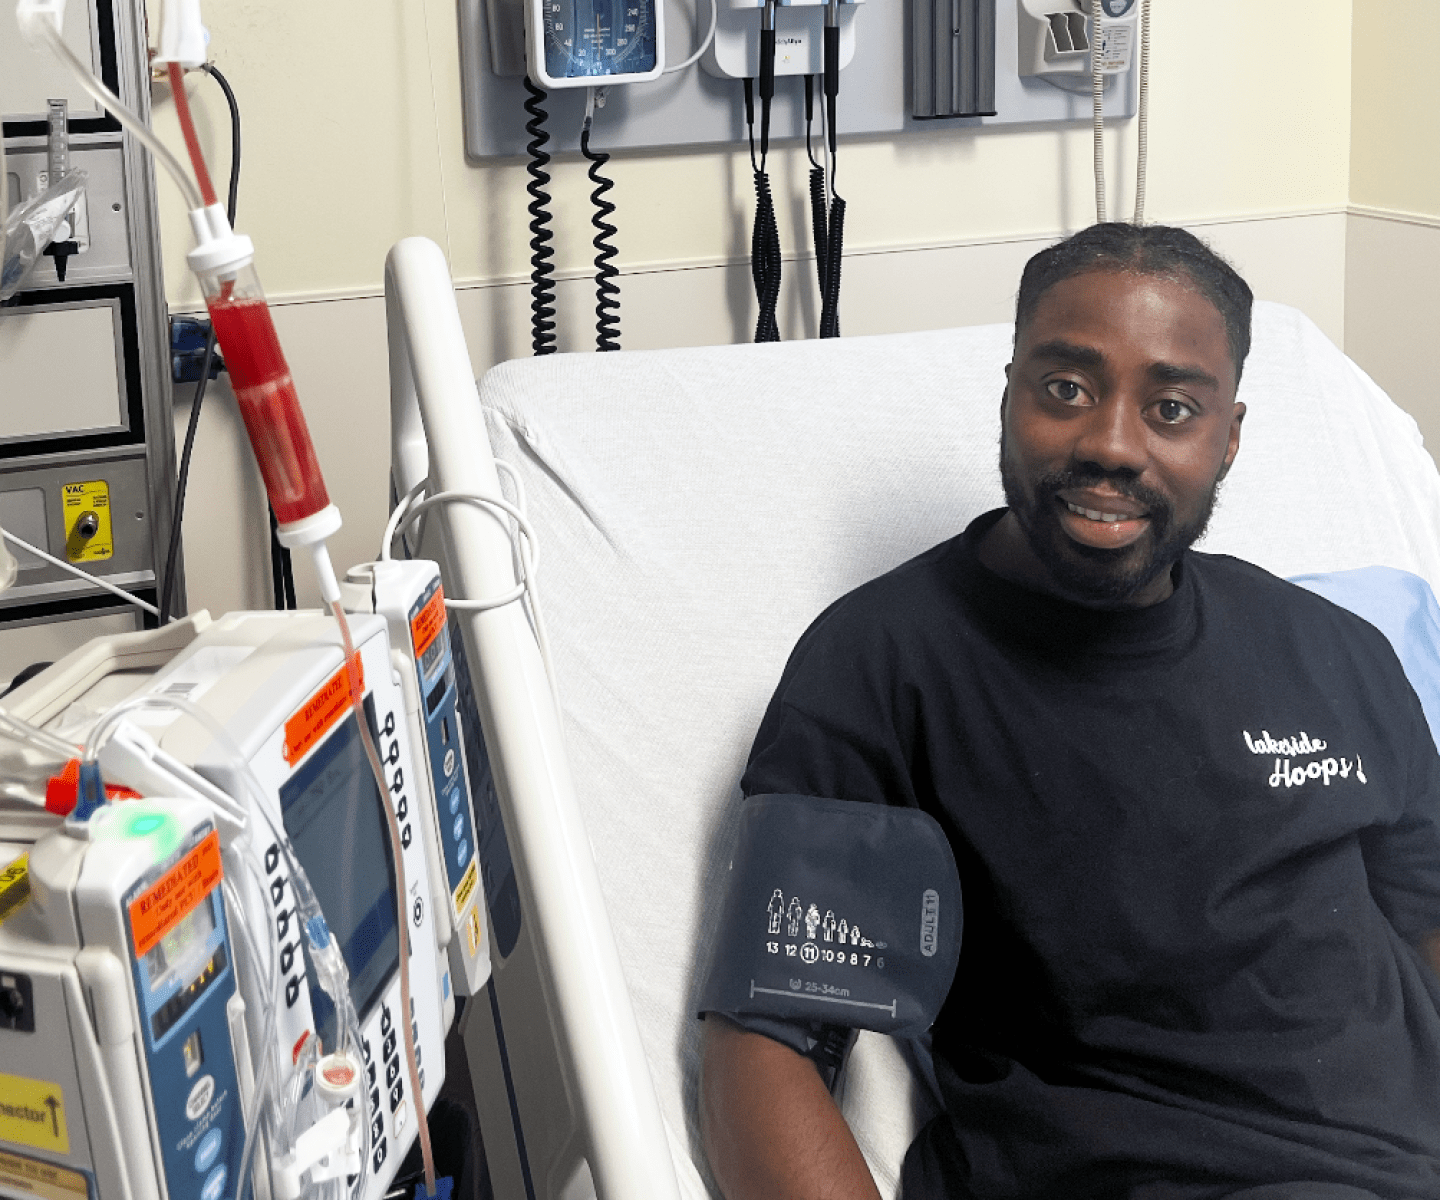 Young man with sickle cell disease receiving stem cell transplant